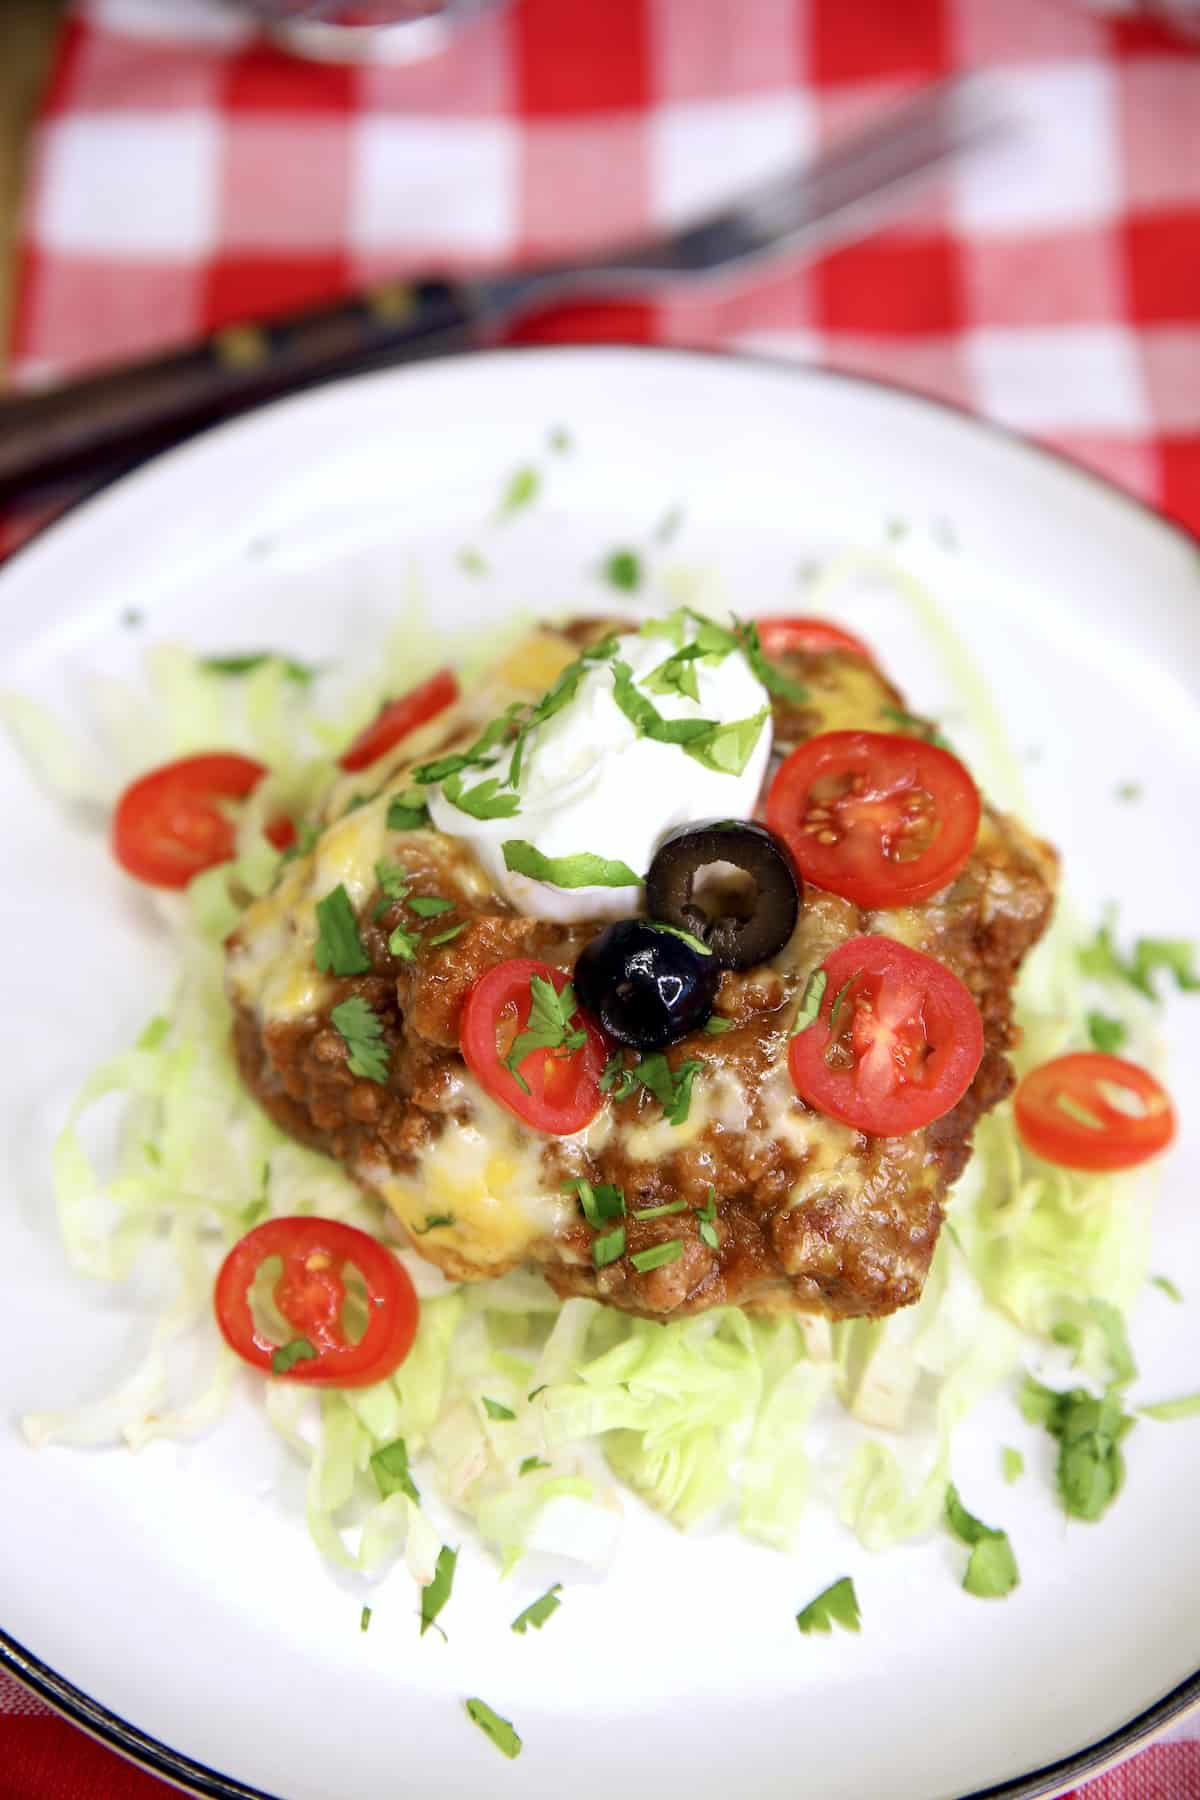 Plate with burrito bake casserole. Topped with sour cream, tomatoes, olives.